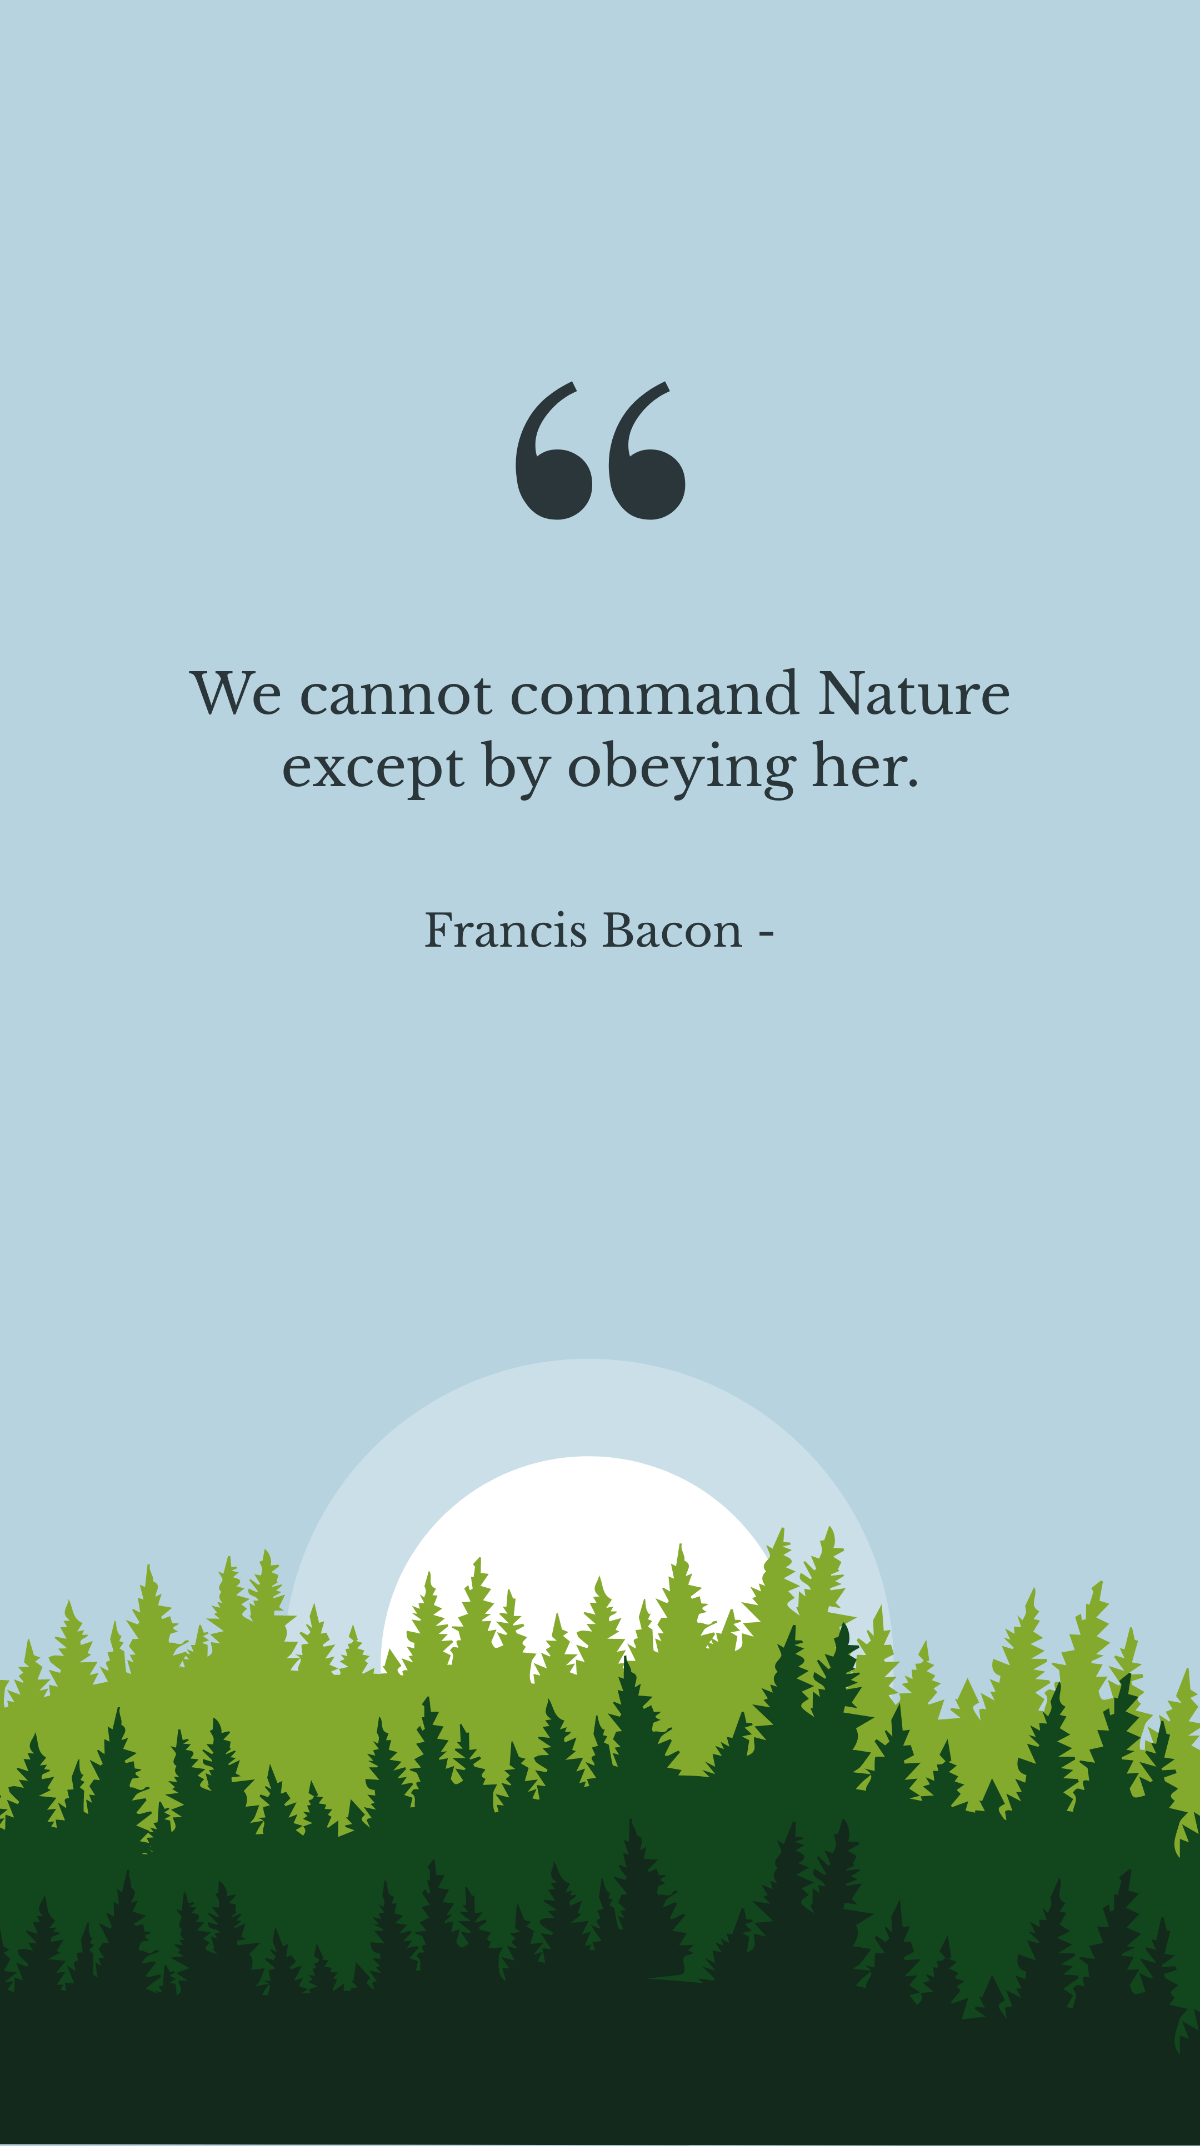 Francis Bacon - We cannot command Nature except by obeying her. Template